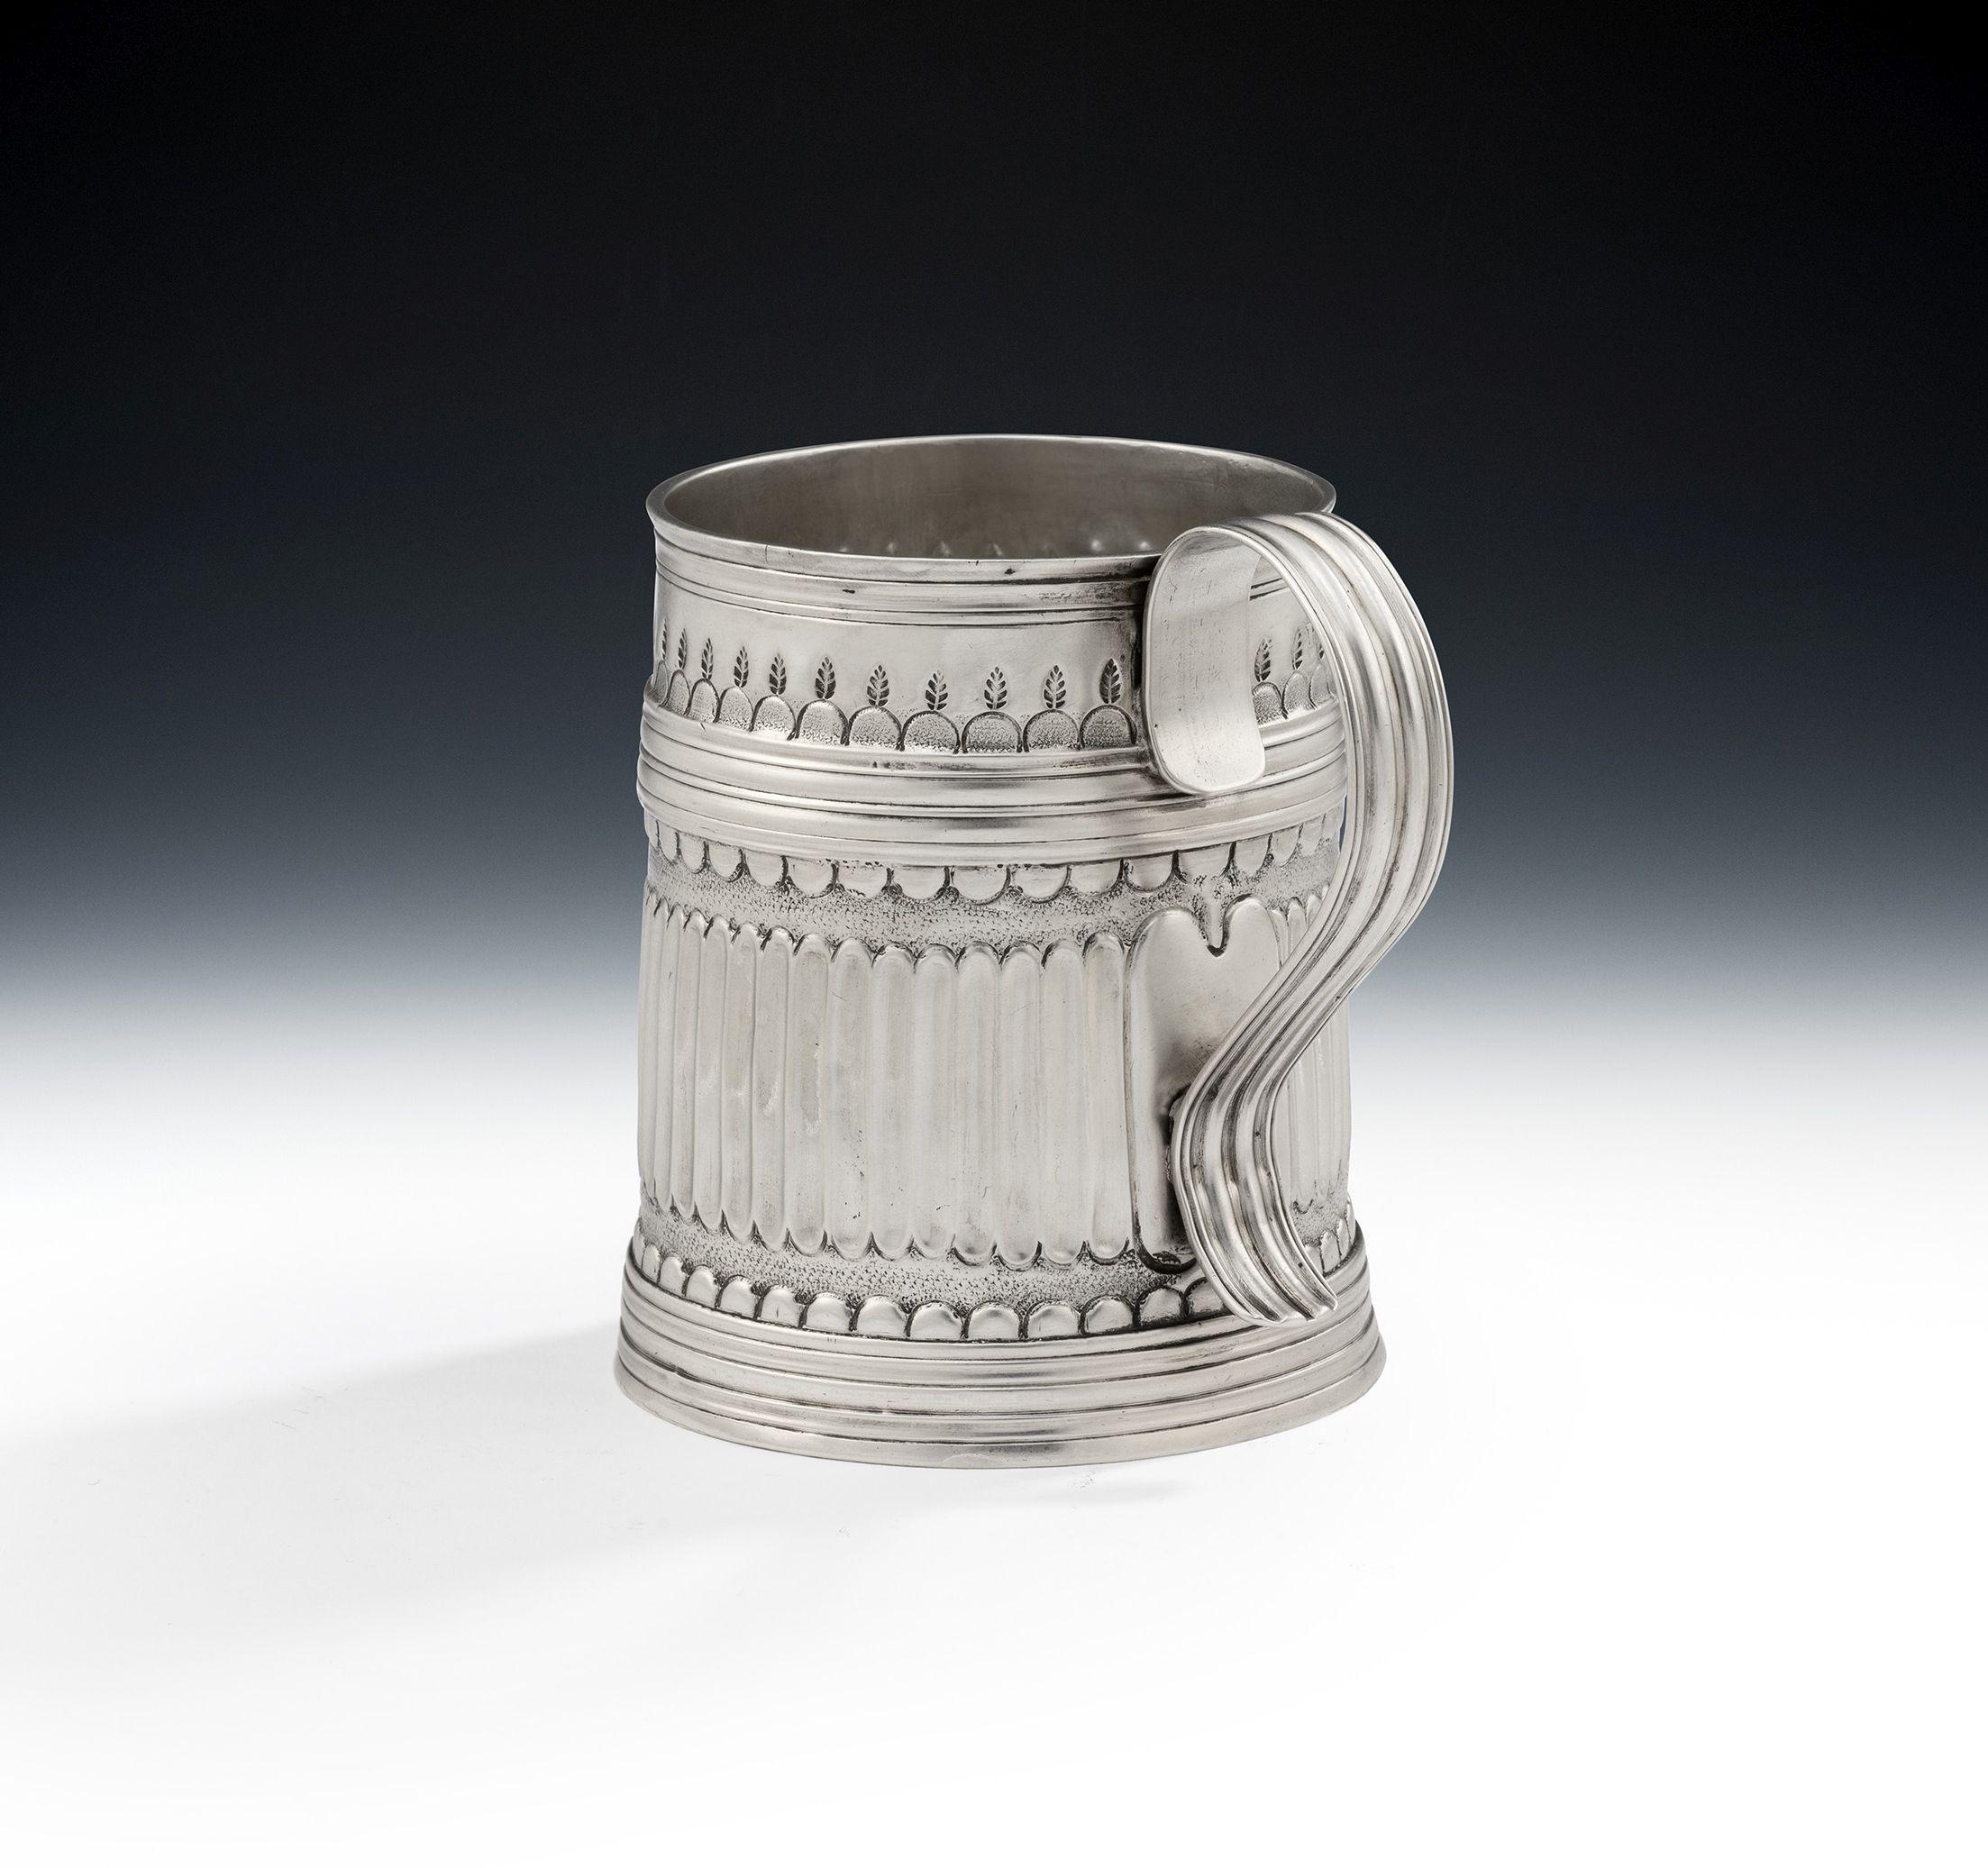 William and Mary William III Britannia Standard Mug Made in London by Thomas Parr I, 1699 For Sale